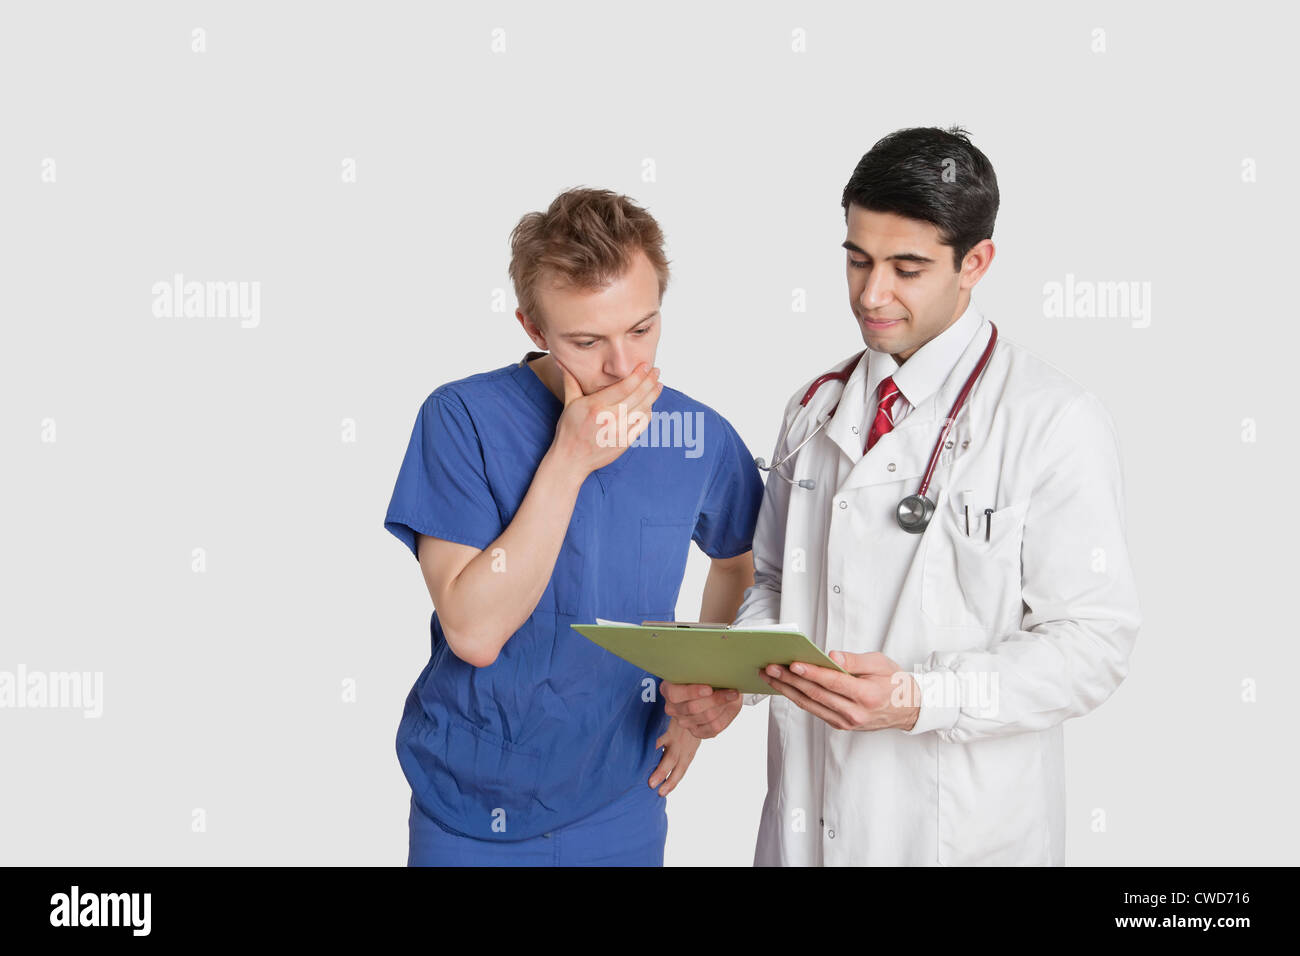 Doctor discussing medical report with male nurse over gray background Stock Photo